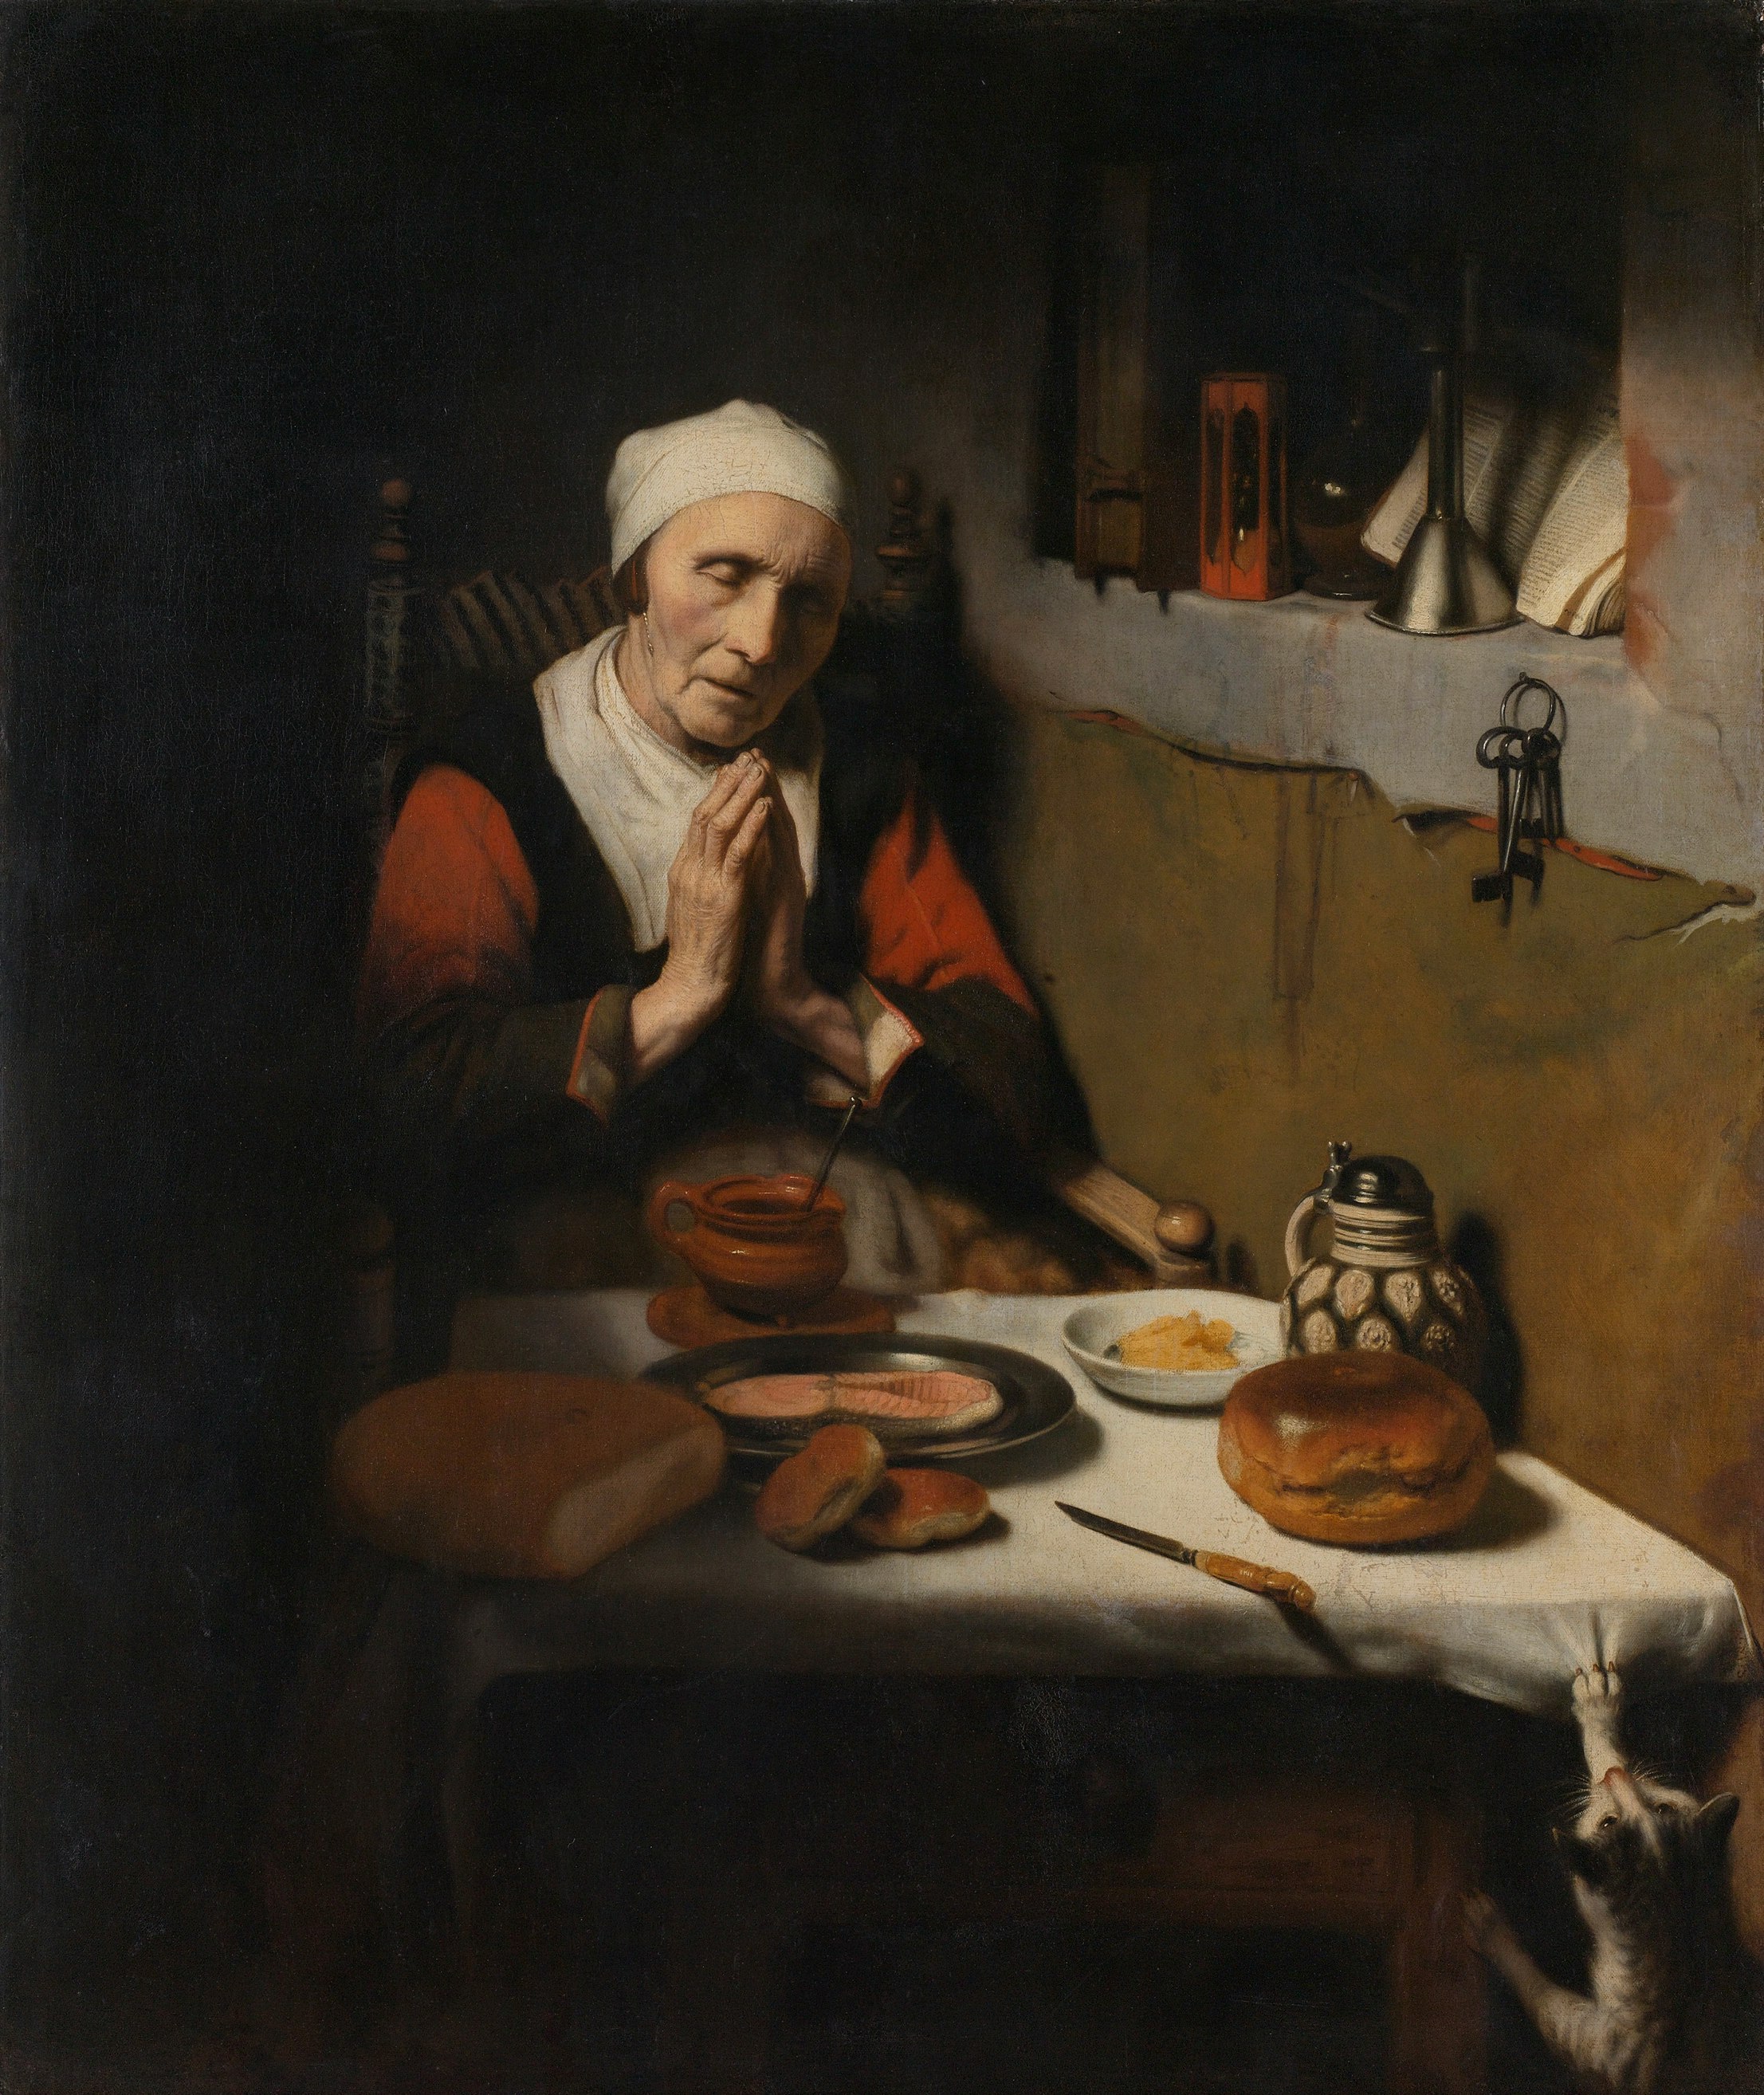 Title: Old Woman Saying Grace, Known as ‘The Prayer without End’.
Date: 1656.
Institution: Rijksmuseum.
Provider: Rijksmuseum.
Providing Country: Netherlands.
Public Domain